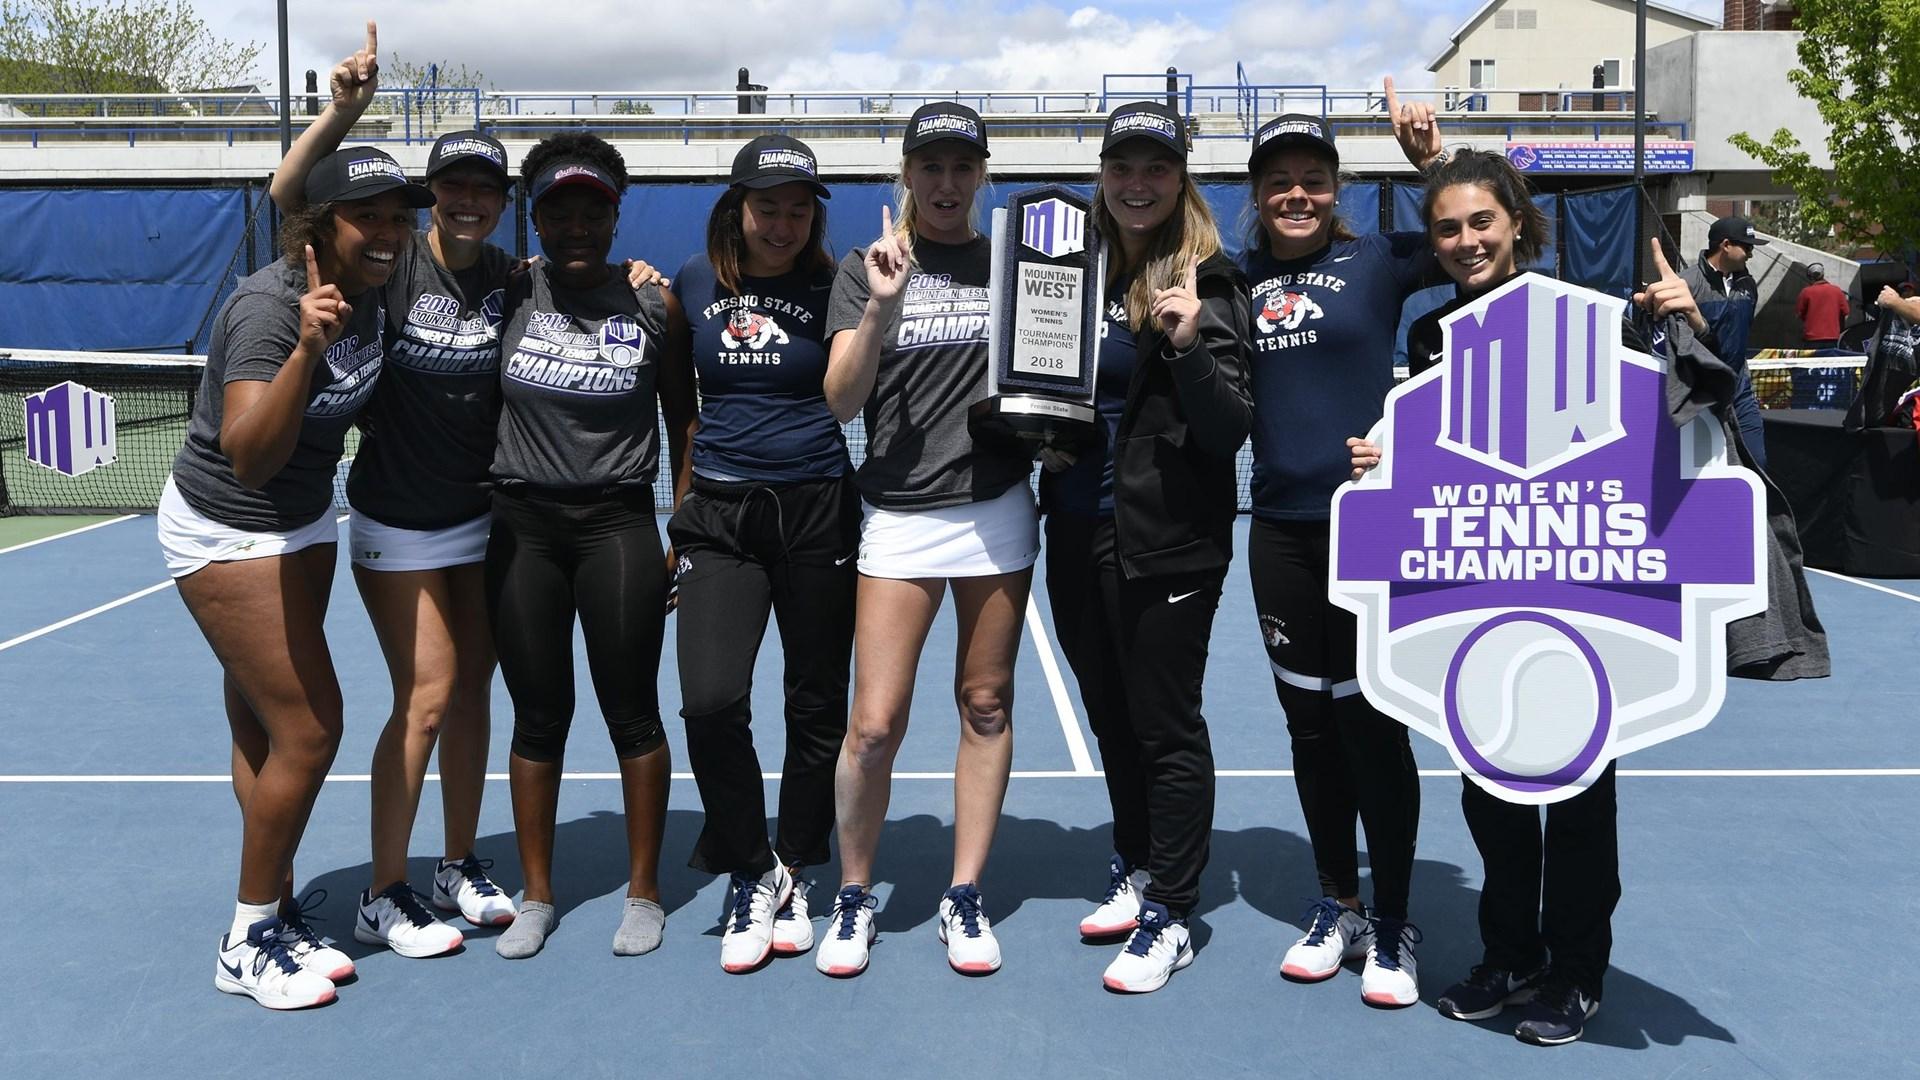 The+Fresno+State+women%E2%80%99s+tennis+team+is+set+to+face+No.+12+UCLA+in+the+first+round+of+the+NCAA+Championships+after+winning+the+Mountain+West+Championships+on+April+29%2C+2018.+%28Fresno+State+Athletics%29+